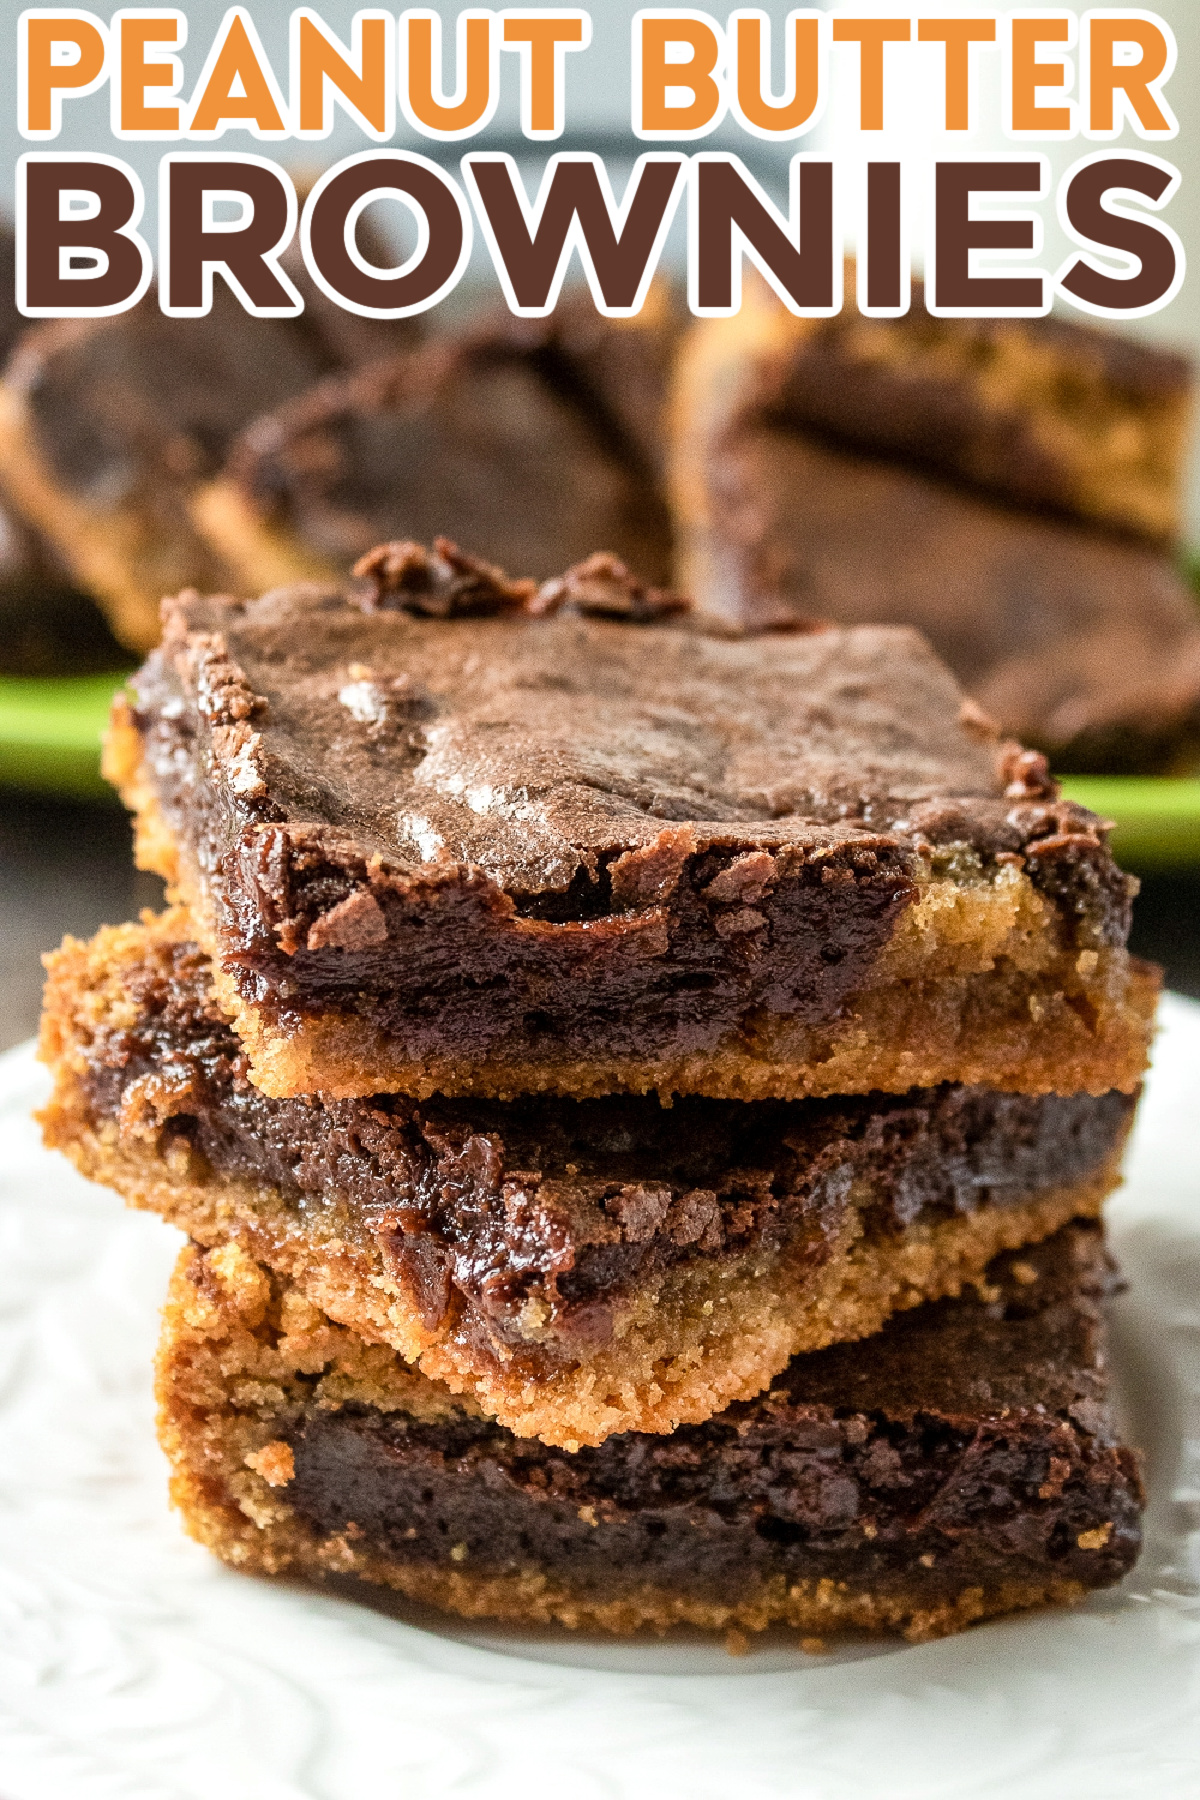 If you love peanut butter and chocolate, this peanut butter brownies recipe is for you! They're chewy, fudgy, rich, and oh so delicious!